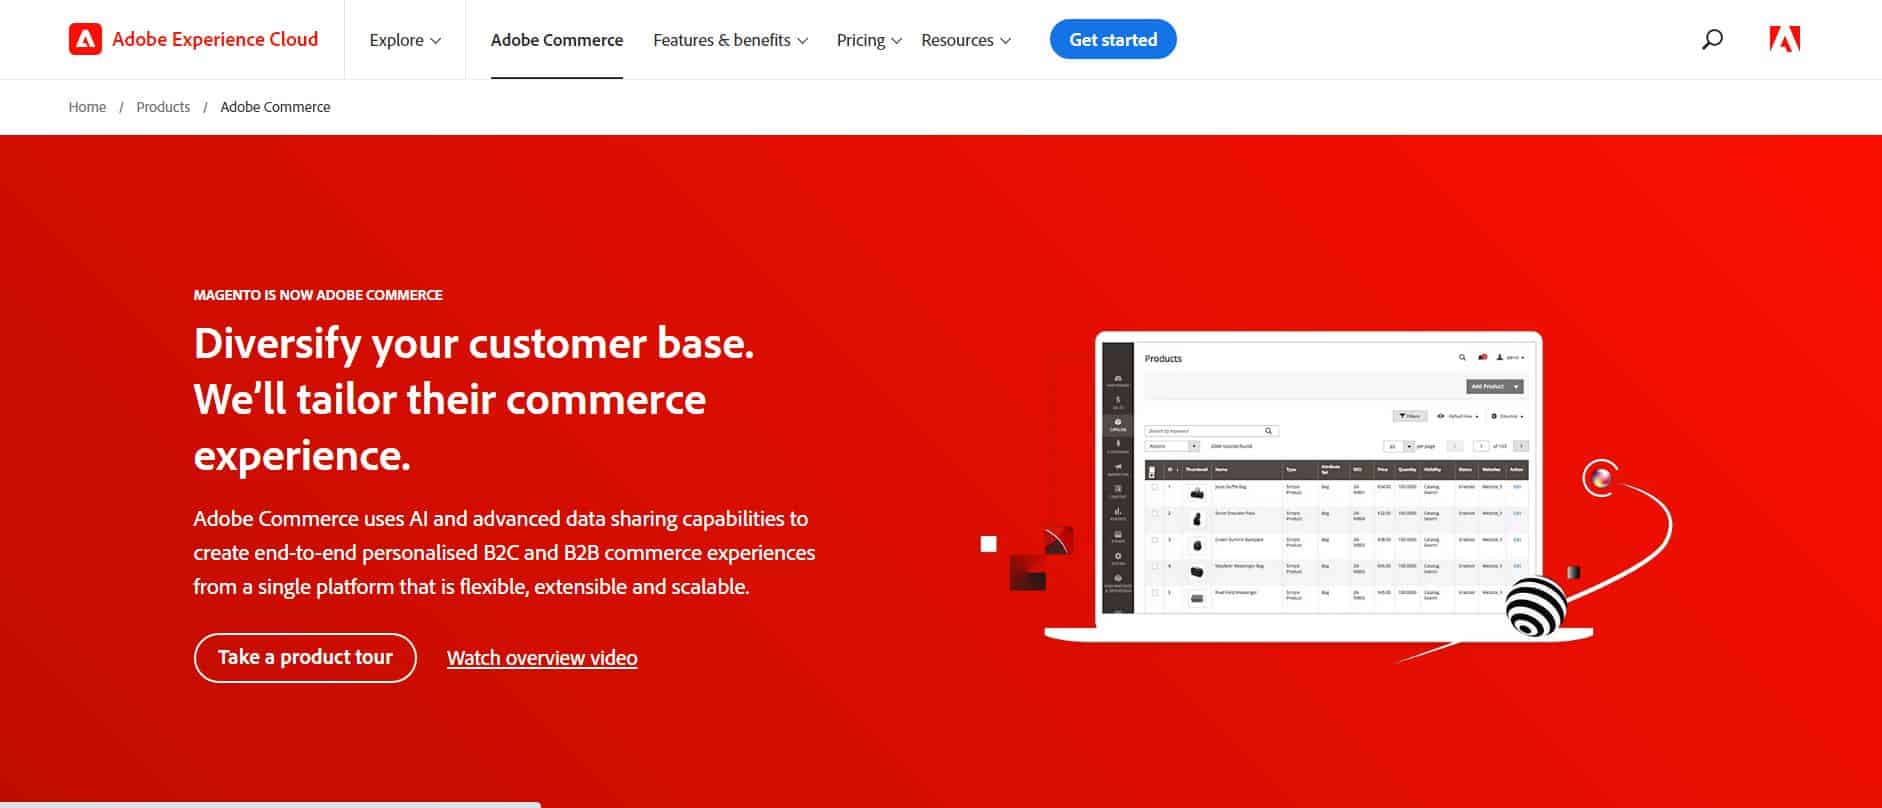 Magento CMS for eCommerce (Adobe Commerce)